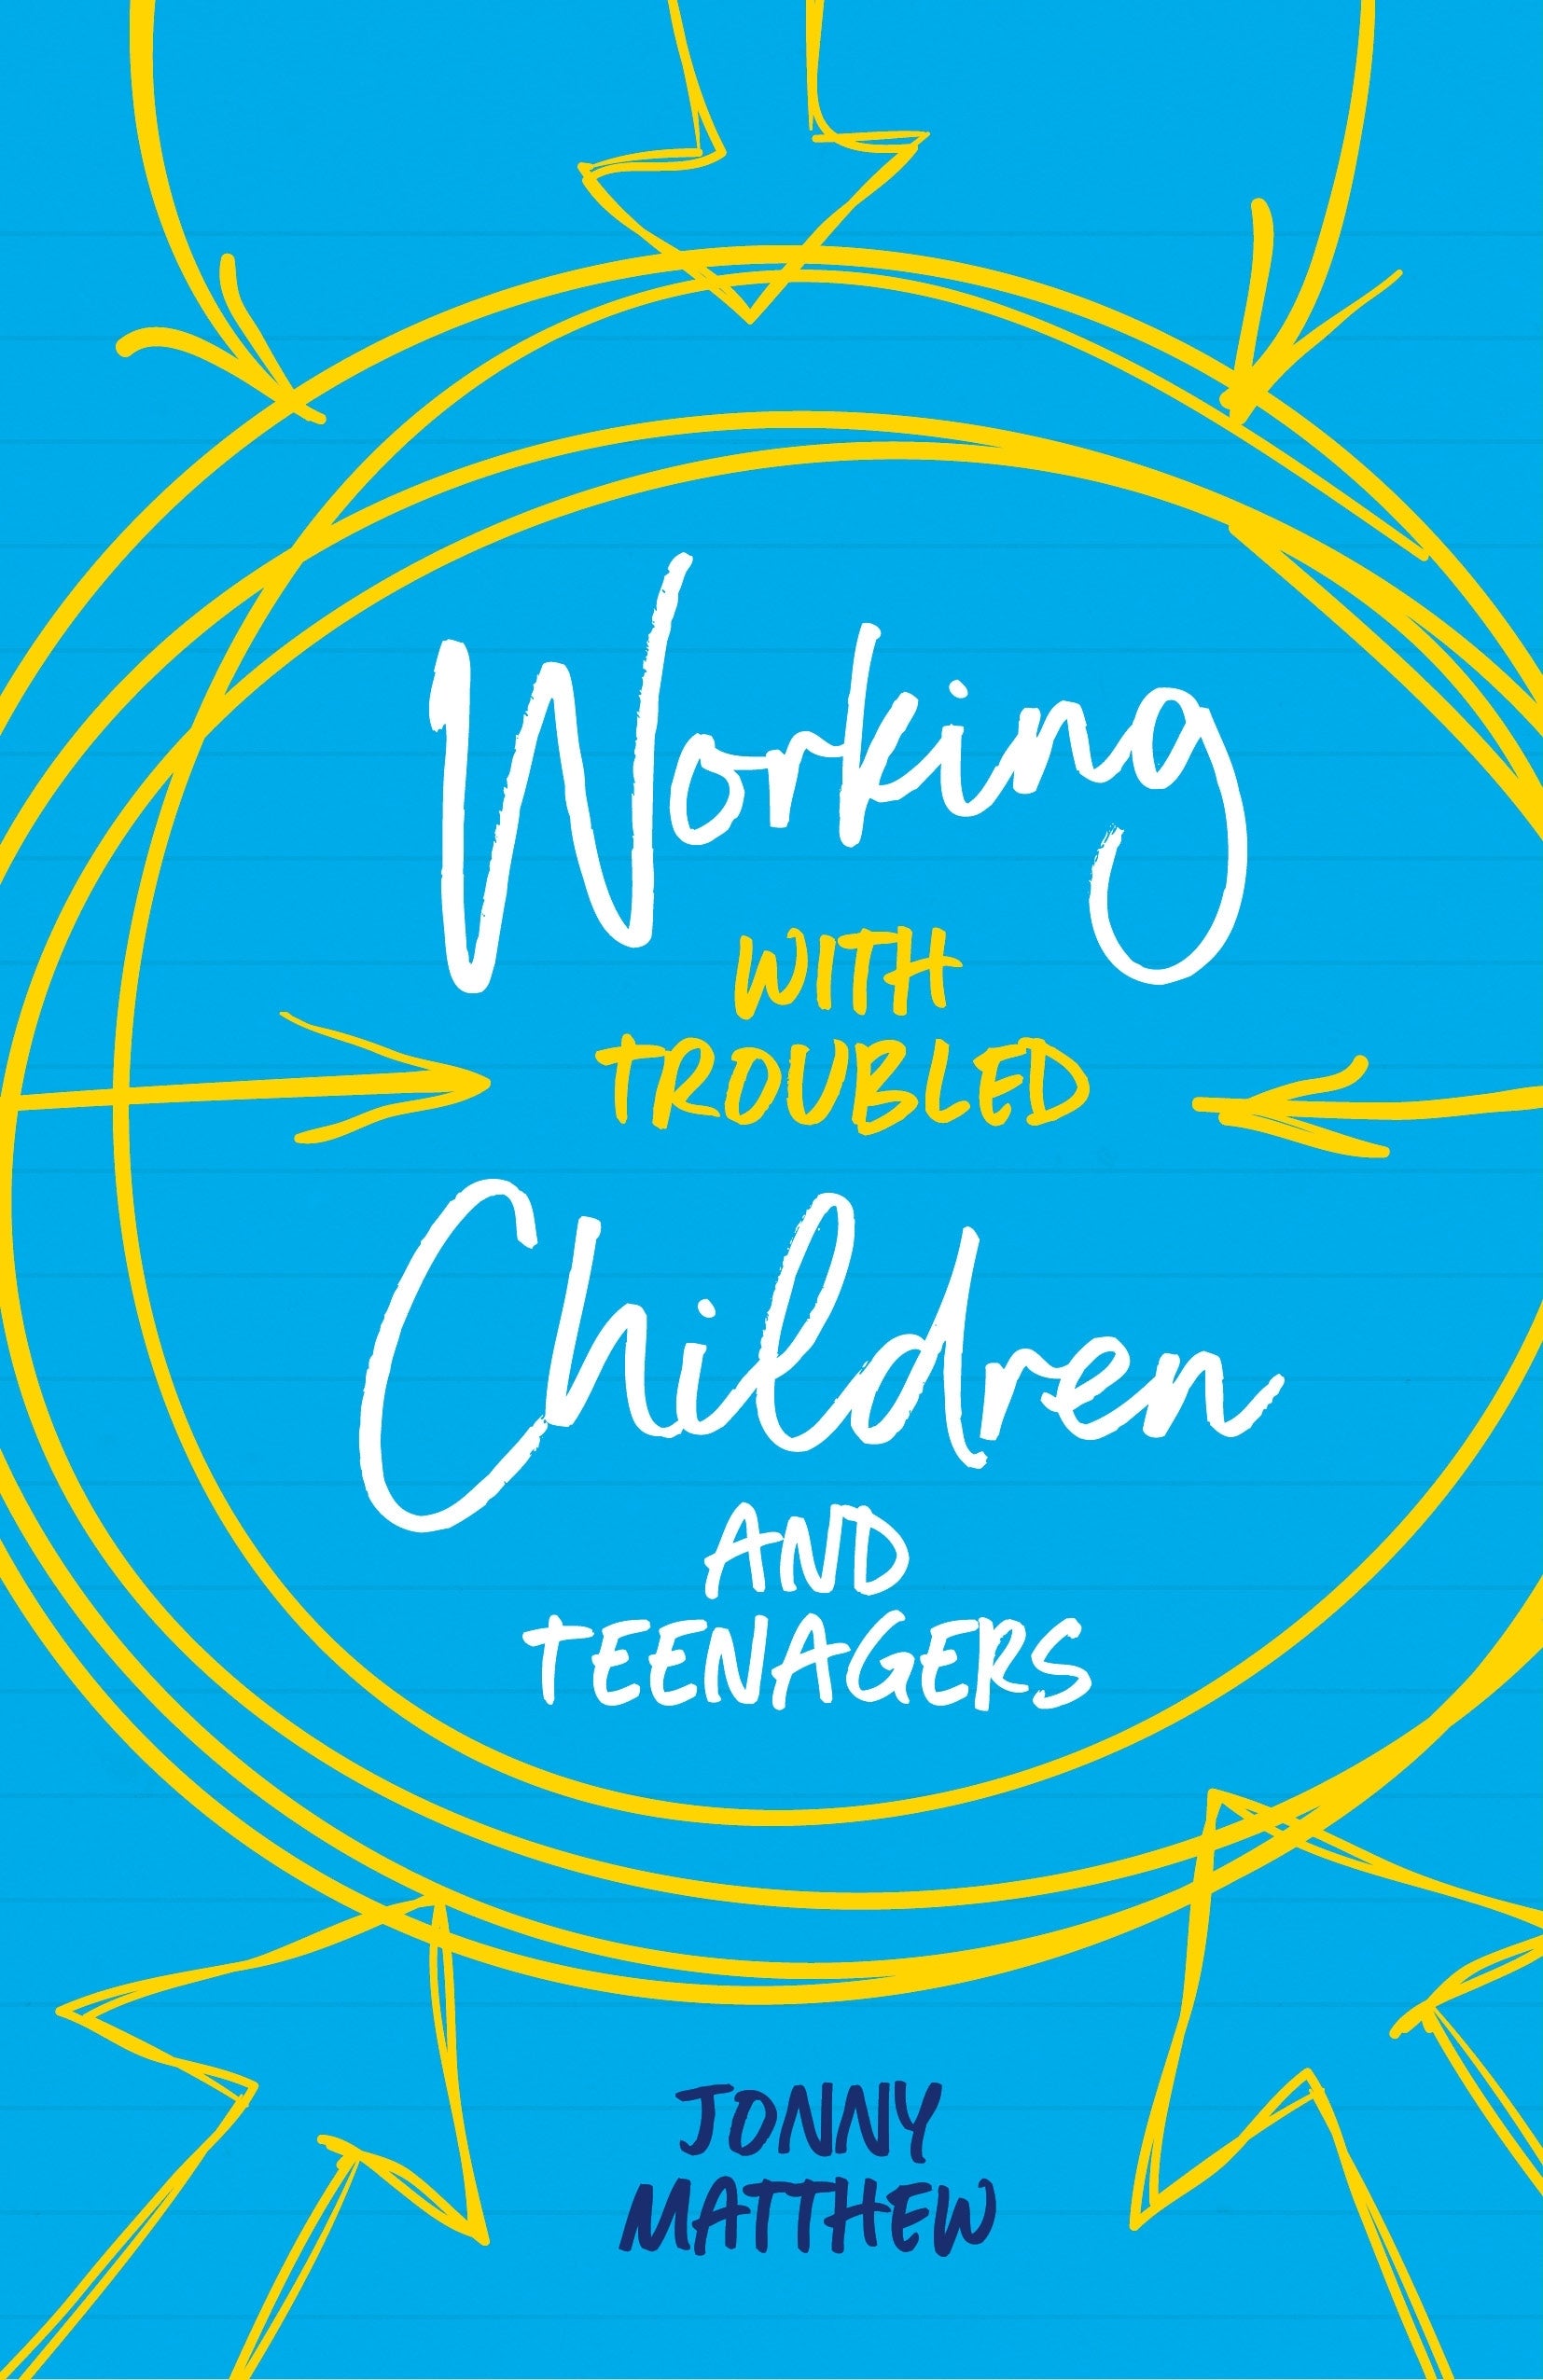 Working with Troubled Children and Teenagers by Jonny Matthew